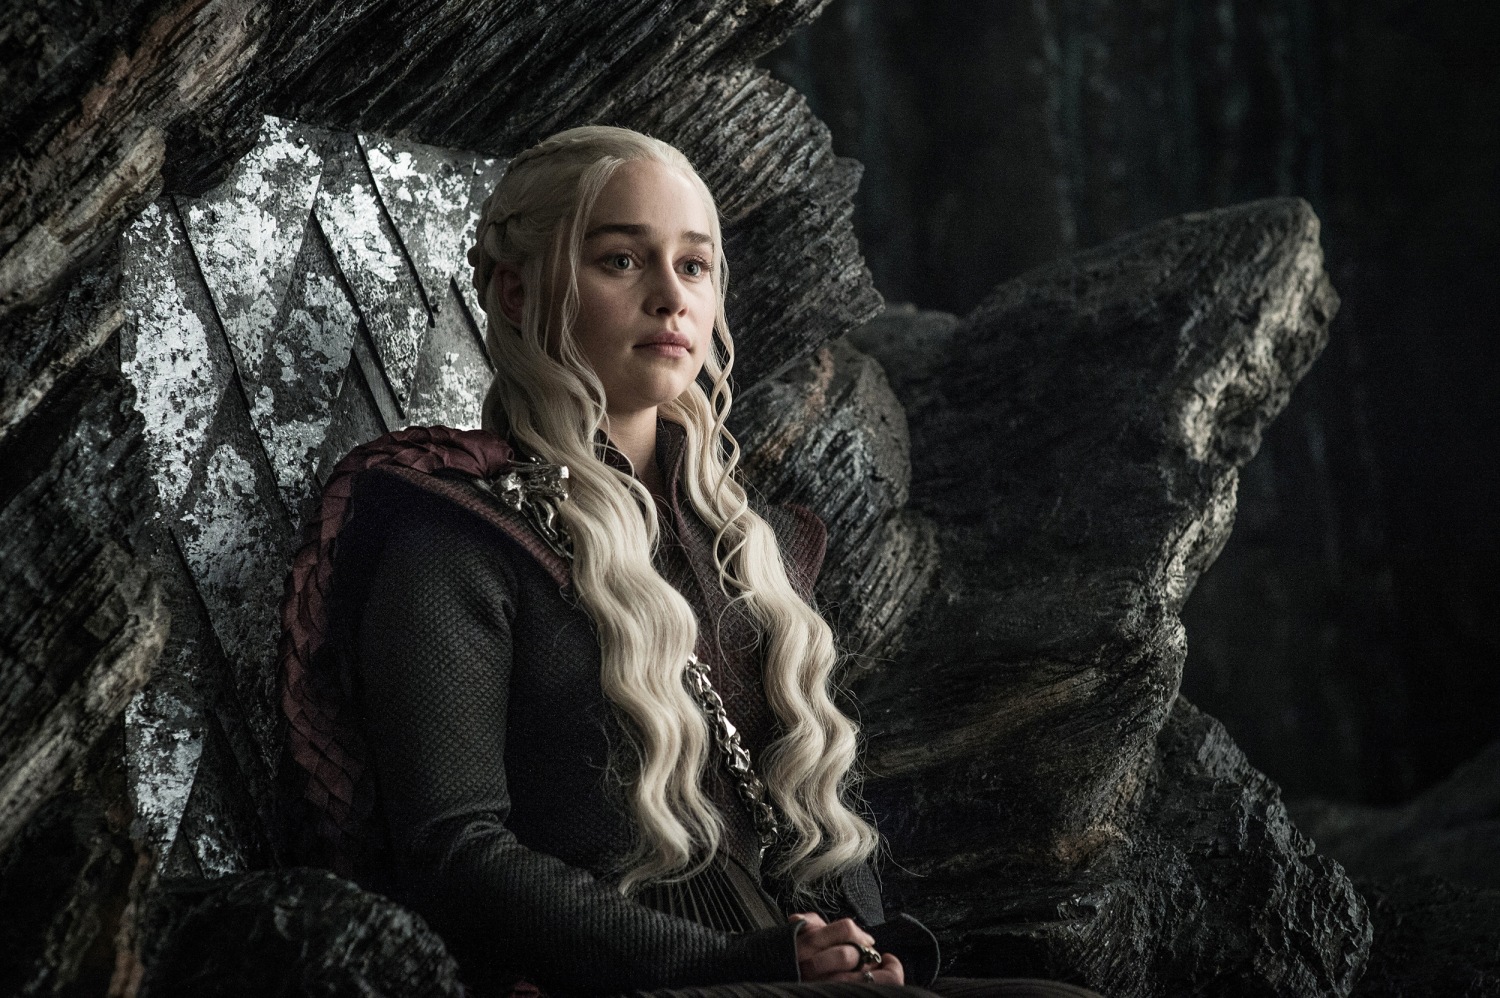 HBO Announces Game of Thrones Season 8 Premiere Date